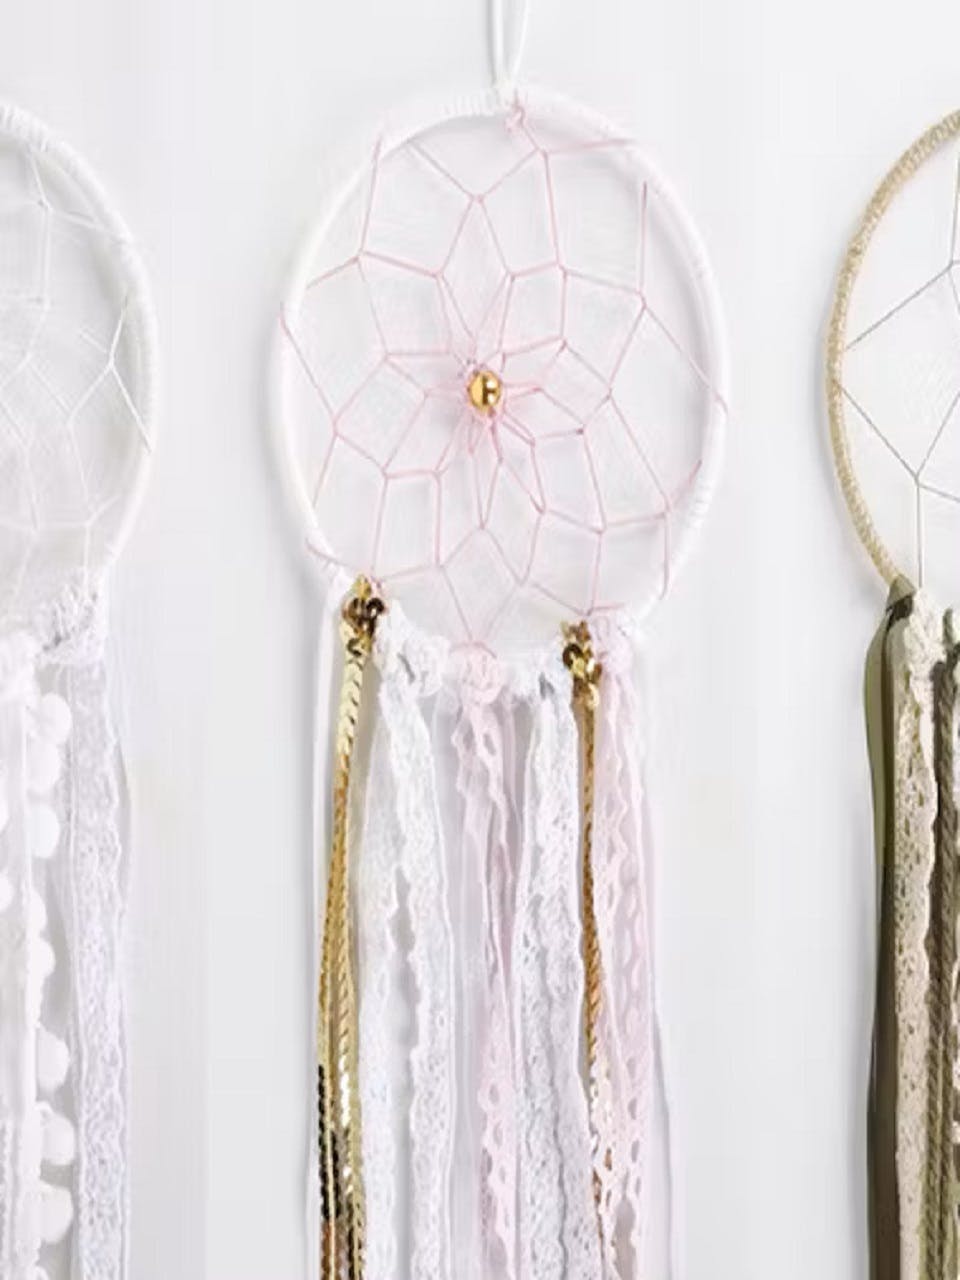 Dream Catcher Kit - Be Rid Of Your Bad Dreams - Craft DIY Wall